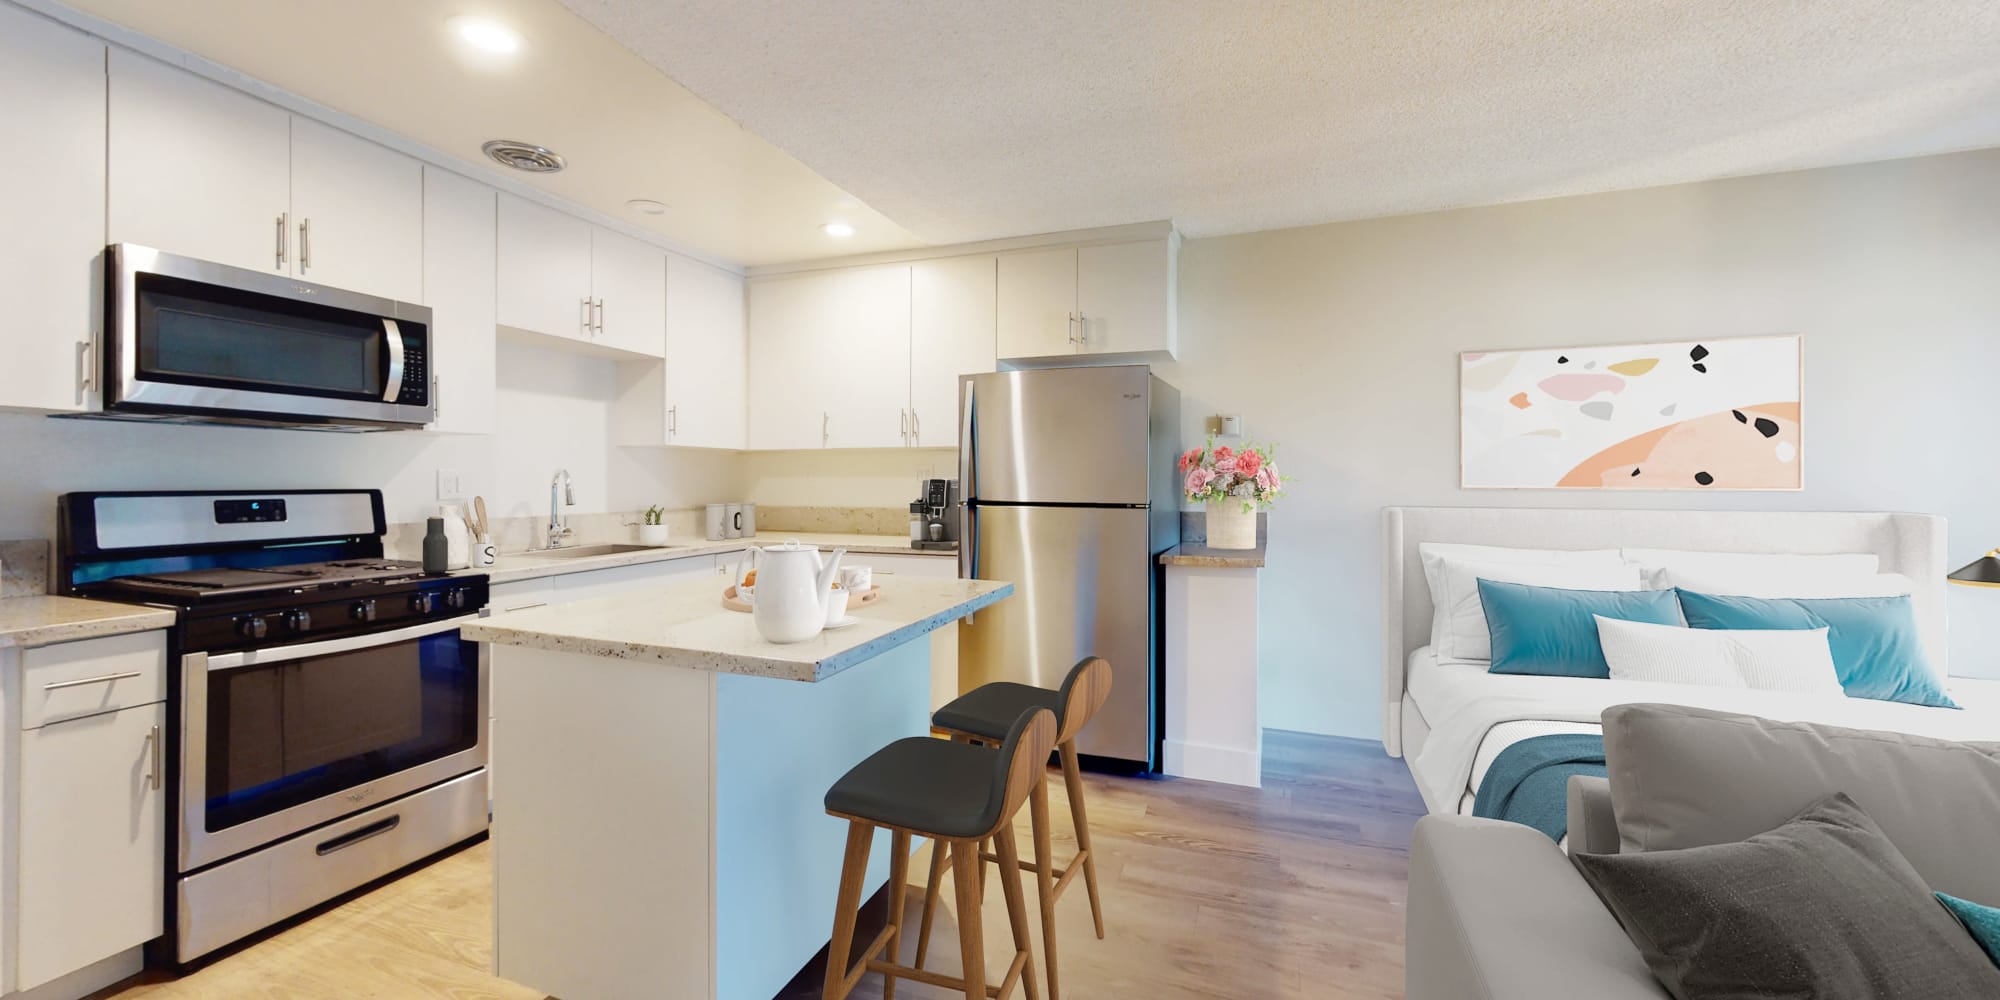 Studio apartment with free-standing island at Mediterranean Village in West Hollywood, California